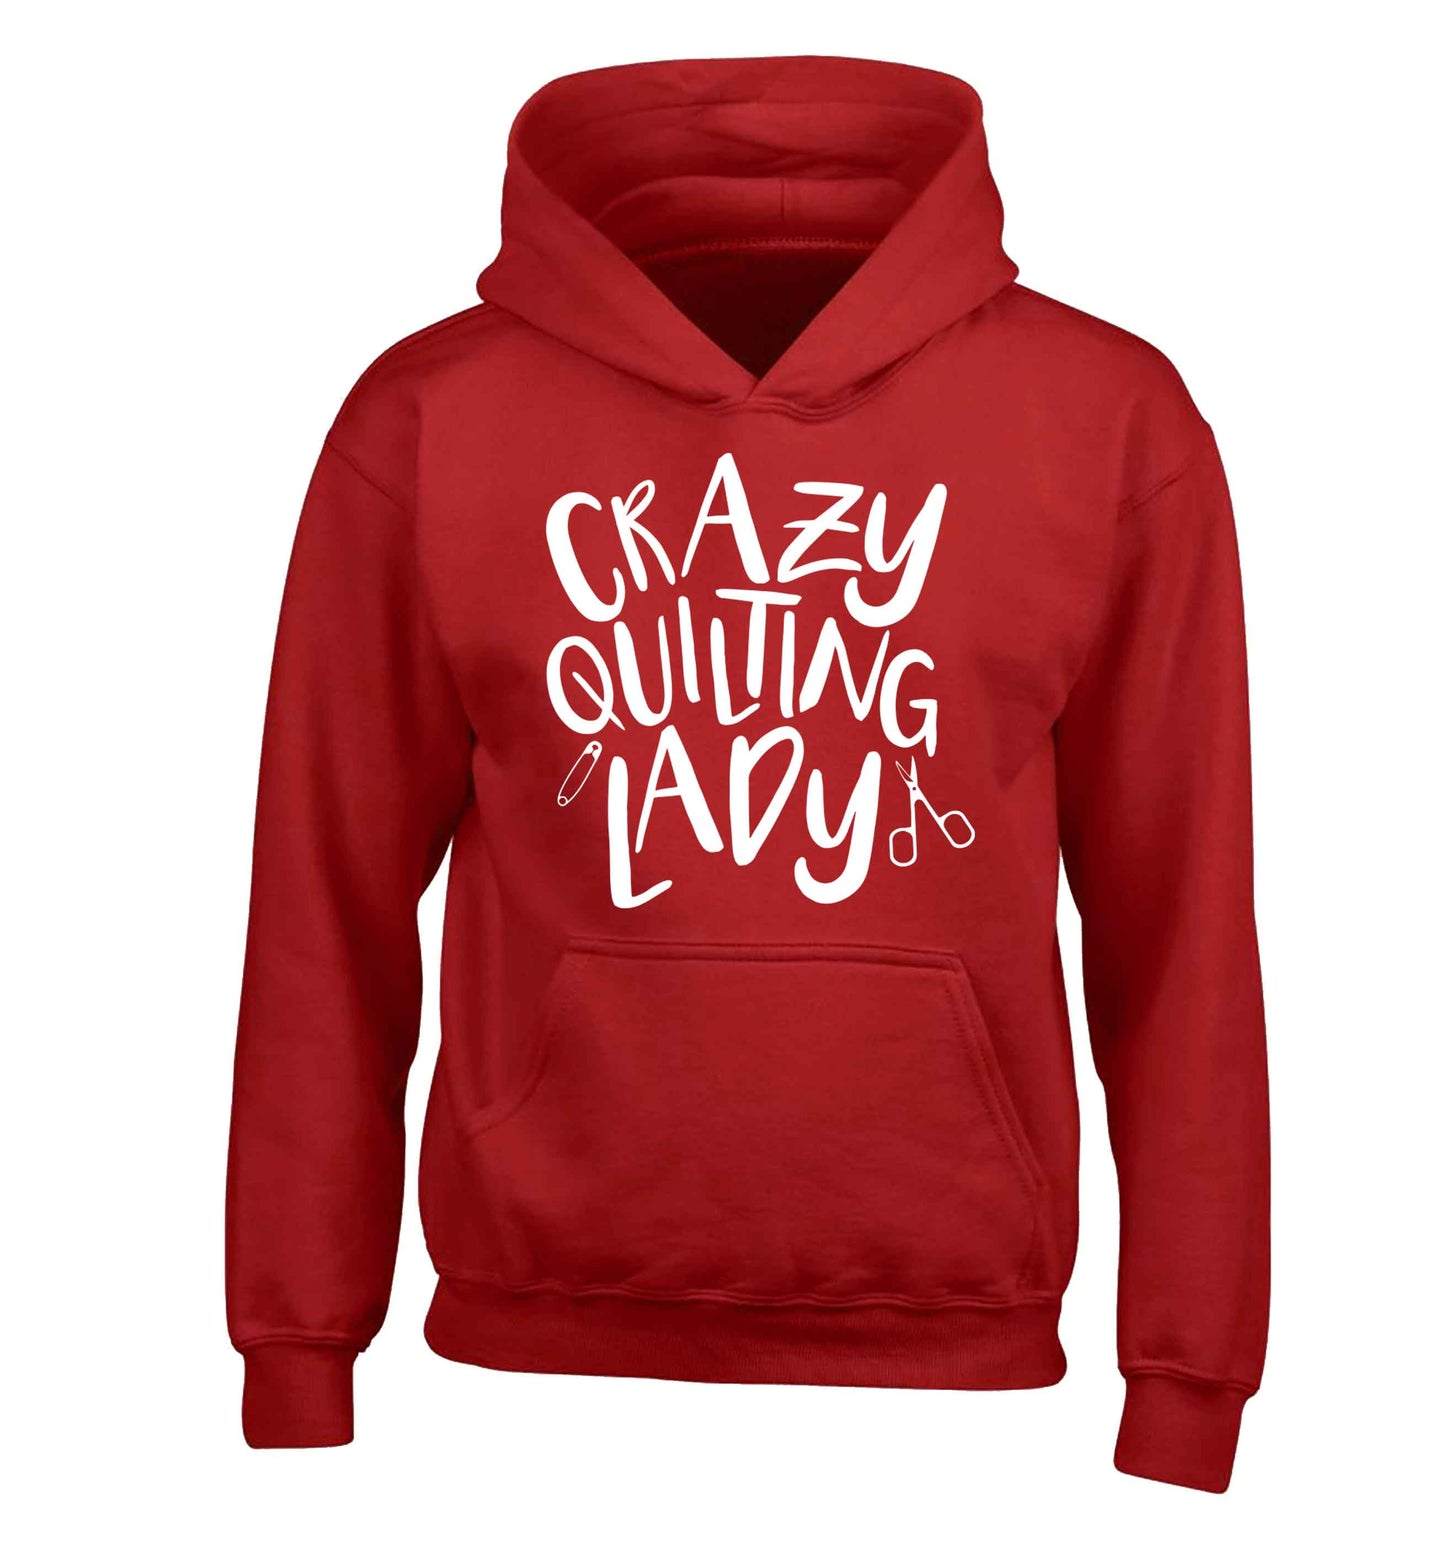 Crazy quilting lady children's red hoodie 12-13 Years